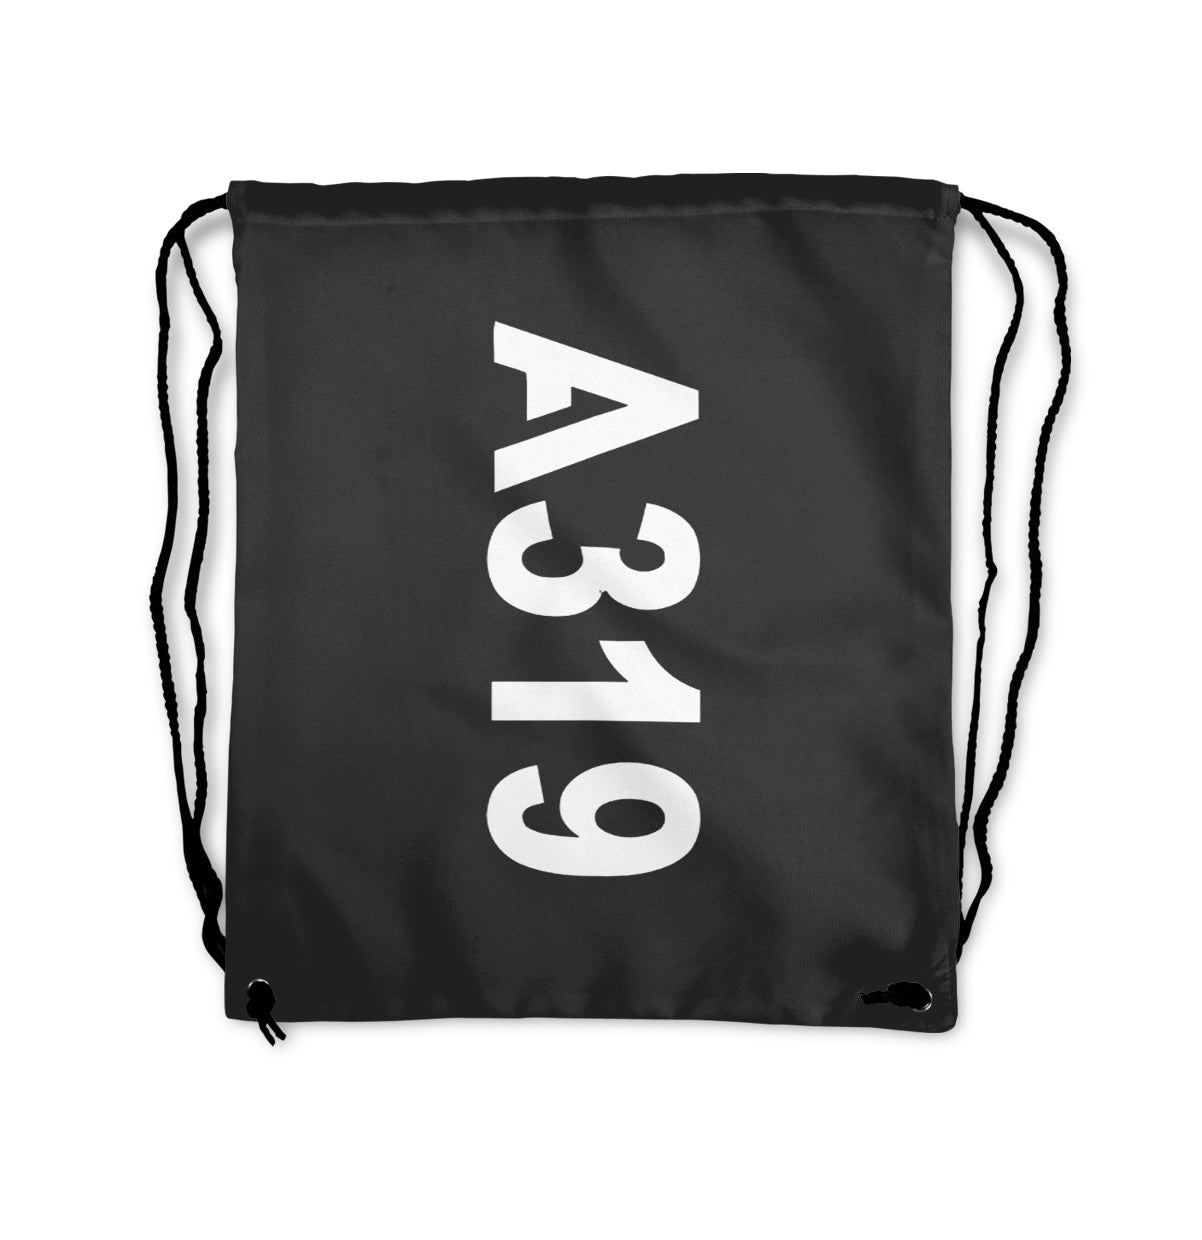 A319 Text Designed Drawstring Bags